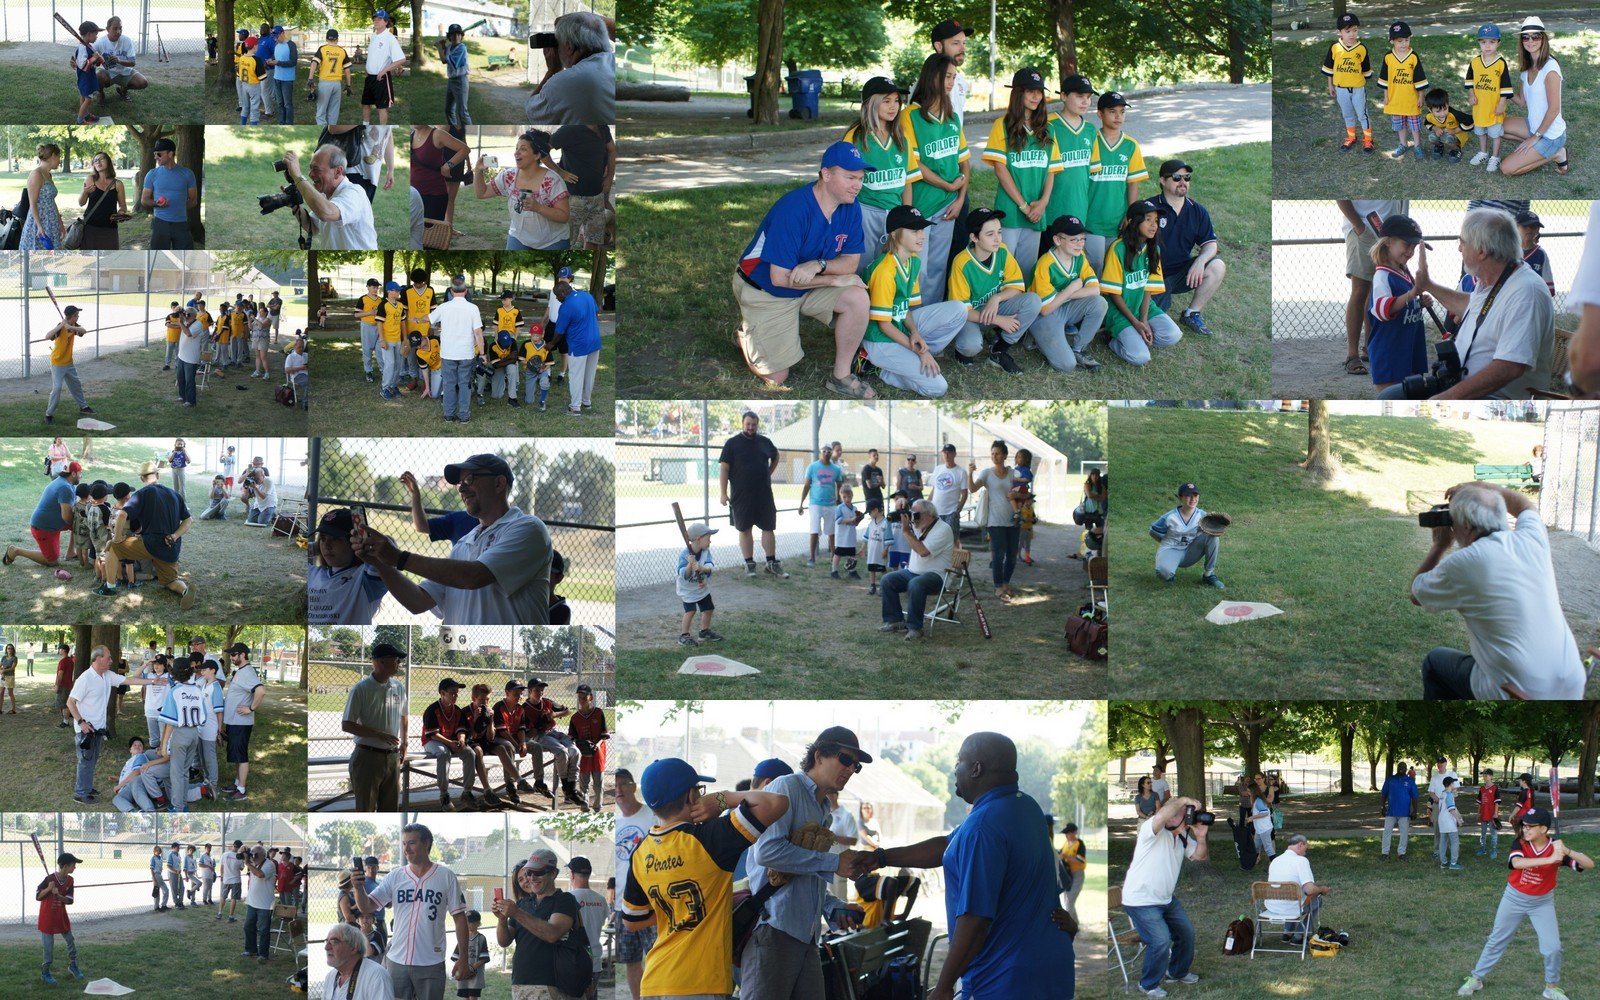 Pictures taken at the 2016 TP House League Baseball Photo Day Event at Christie Pits Diamond 3 on June 25, 2016.